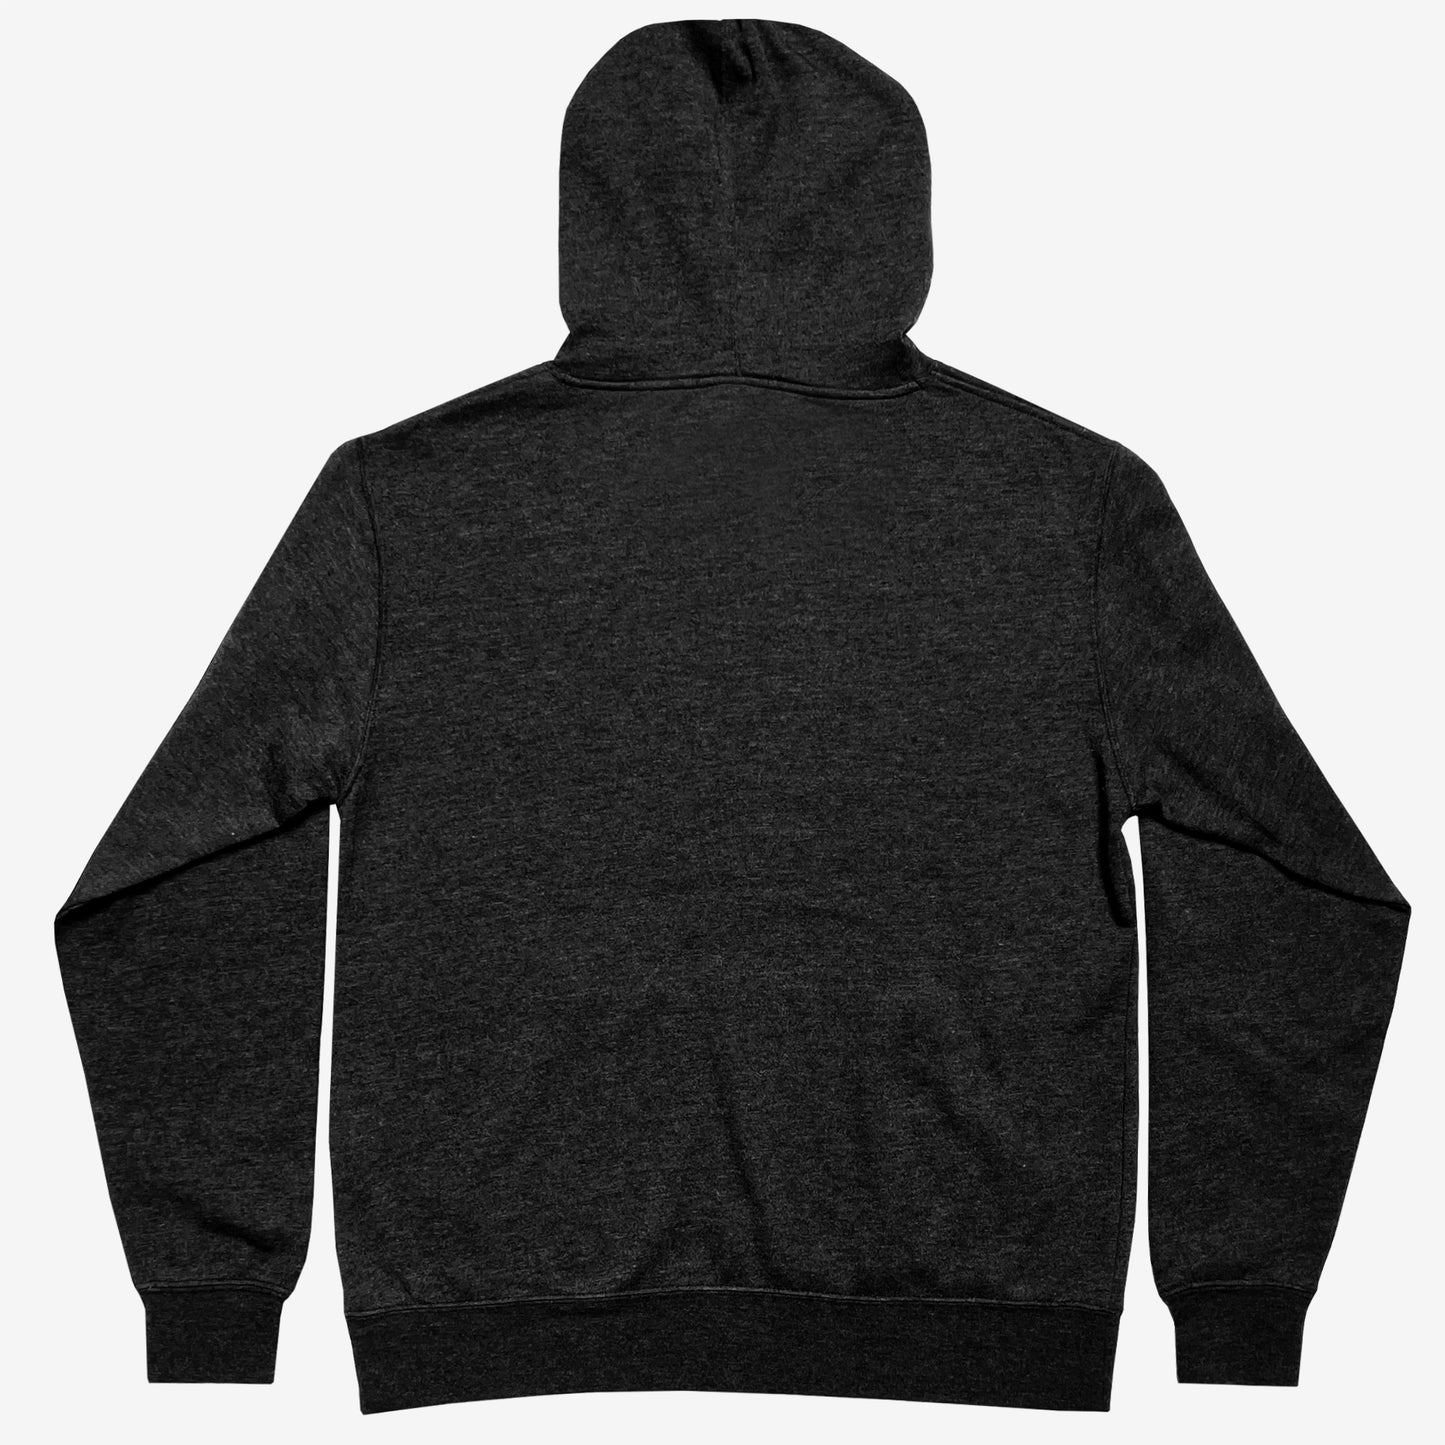 
                  
                    Eat. Learn. Play. Stacked Lightweight Hoodie - Charcoal
                  
                